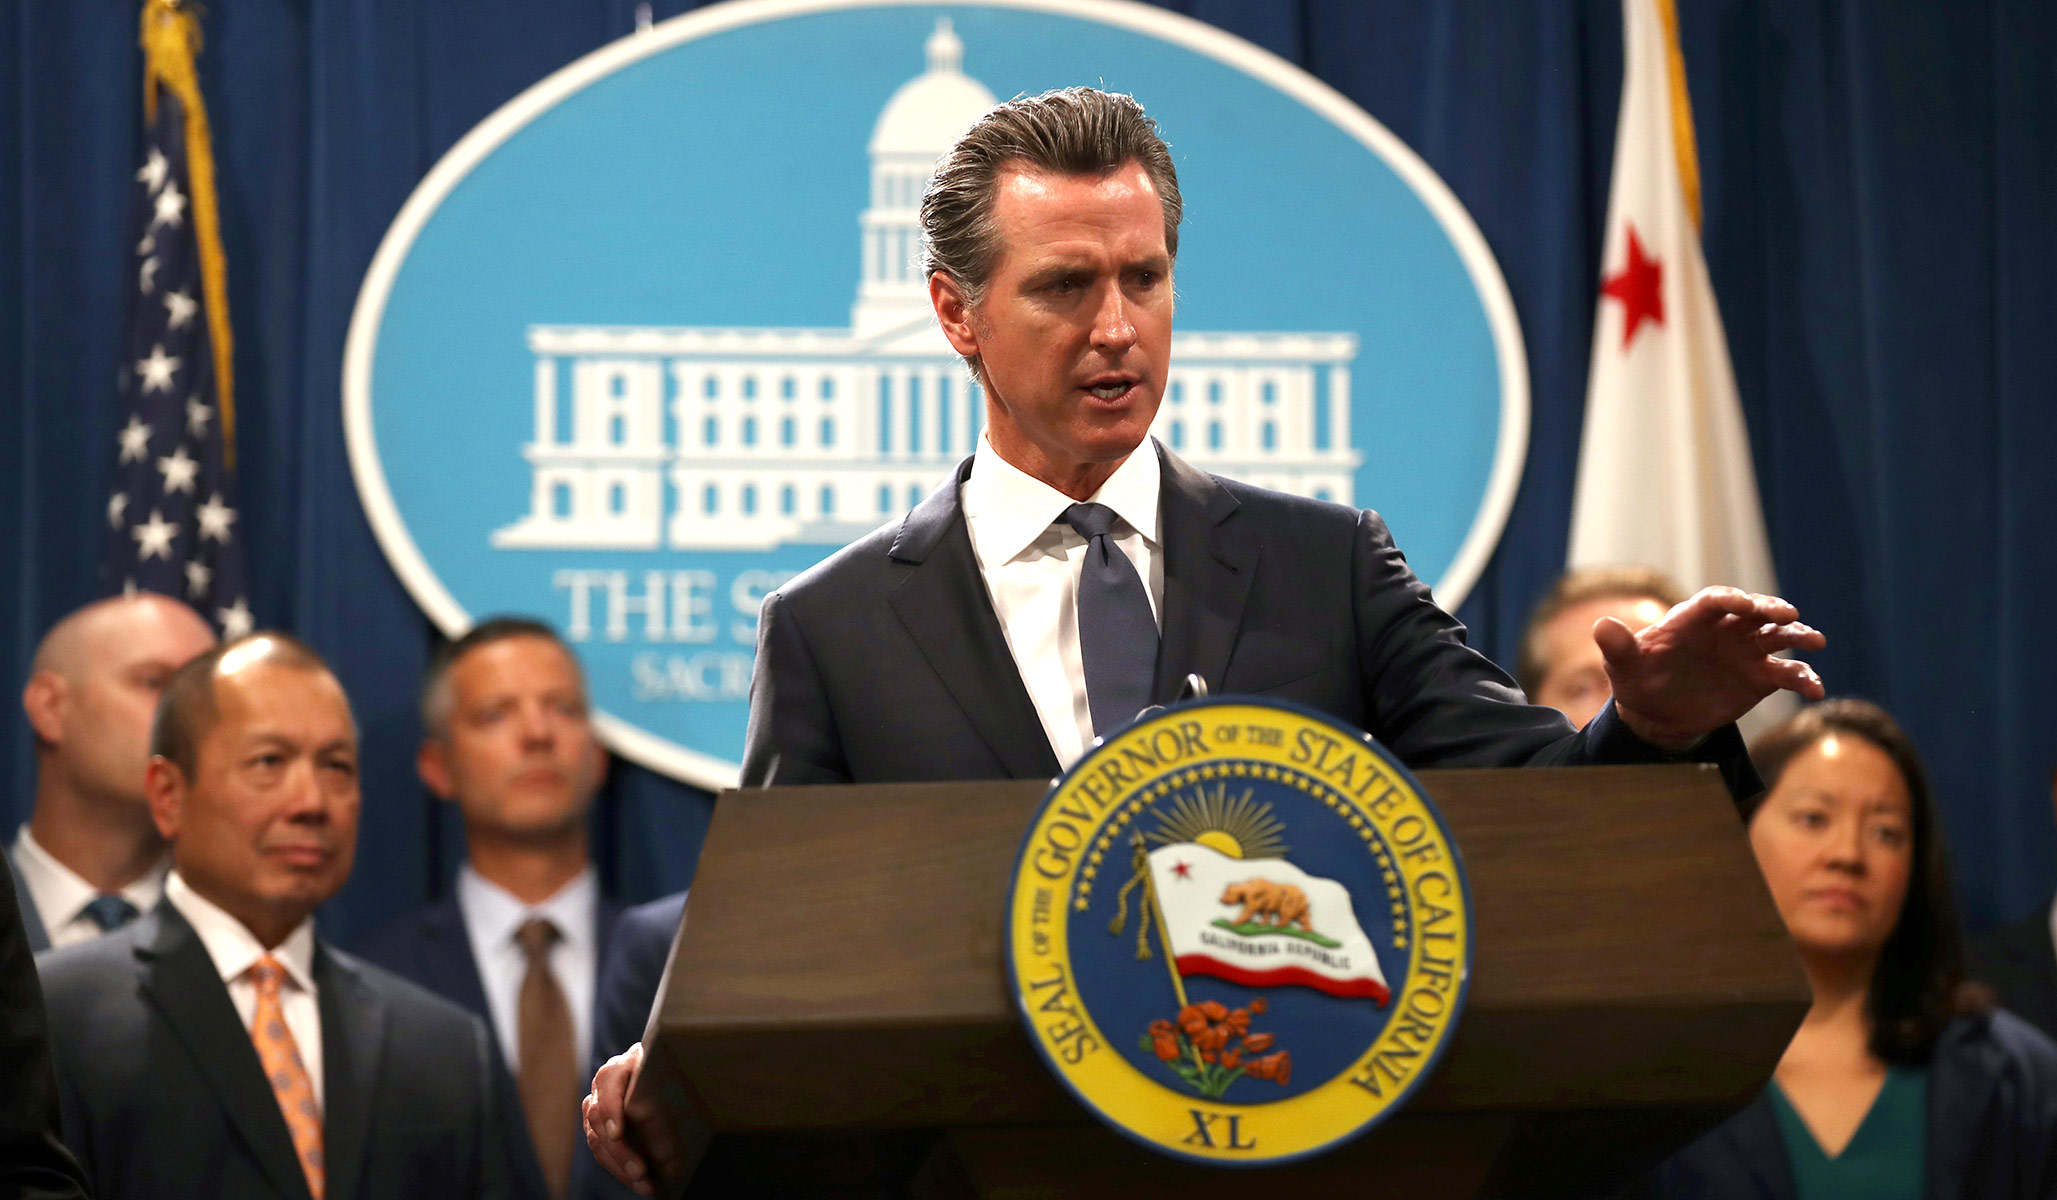 Trouble in Paradise: The Crumbling California Model